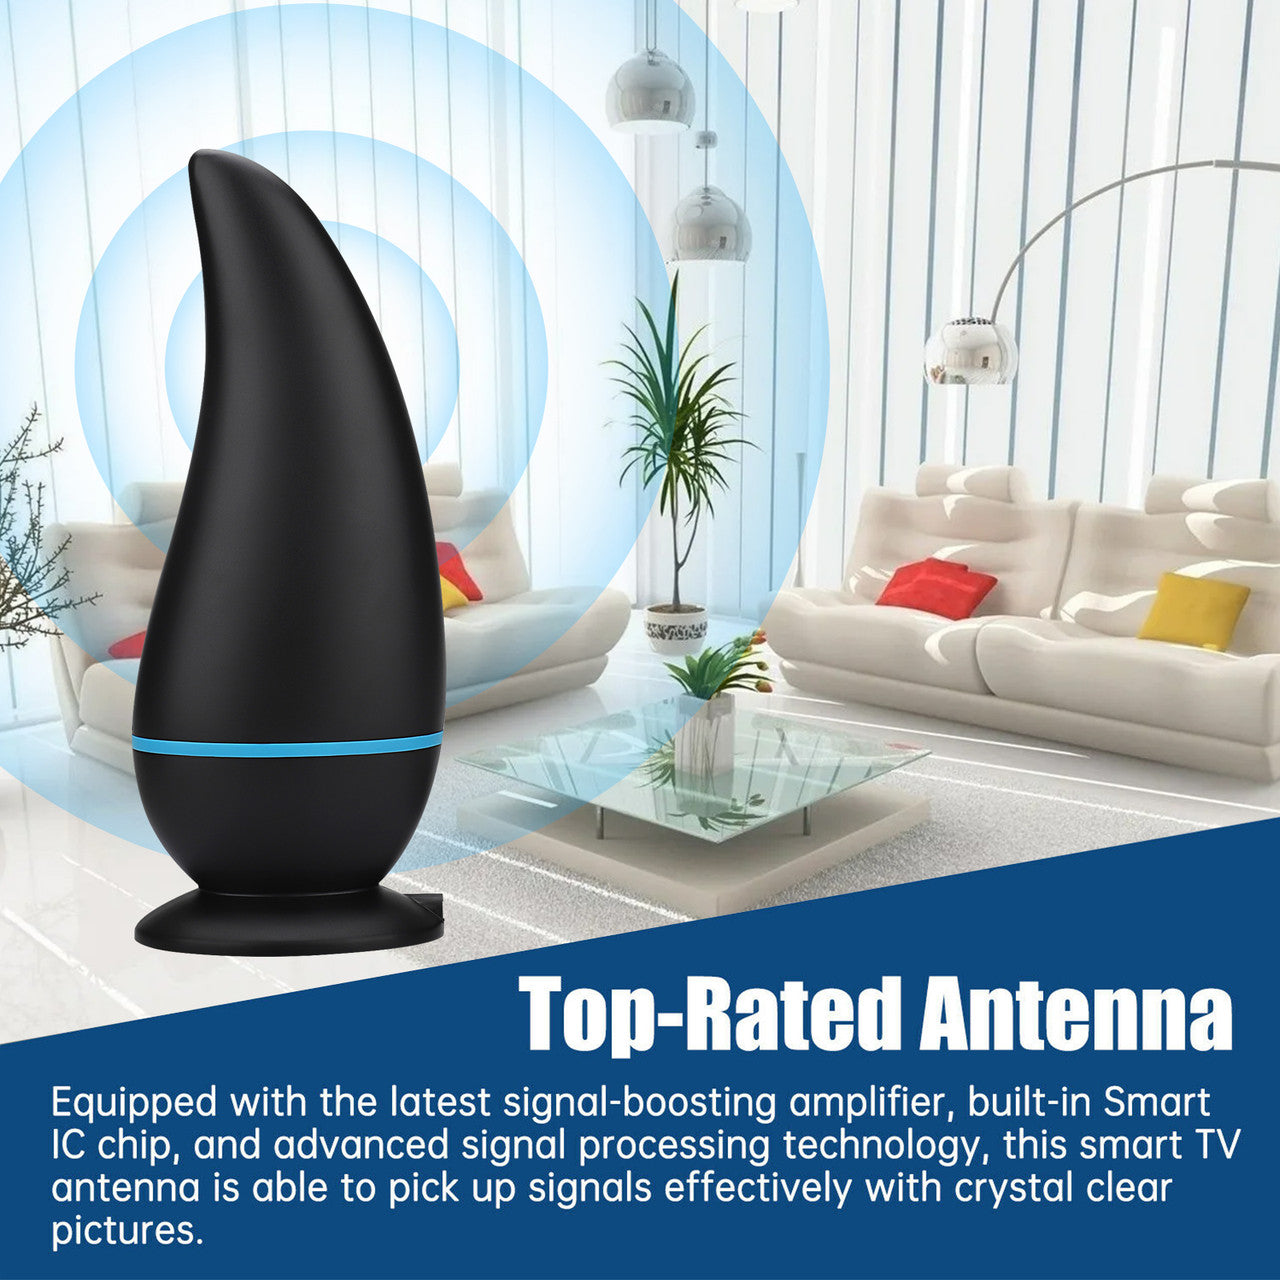 New Indoor HDTV Antenna with a Unique Design and Strong Signal Reception, Easy to Install